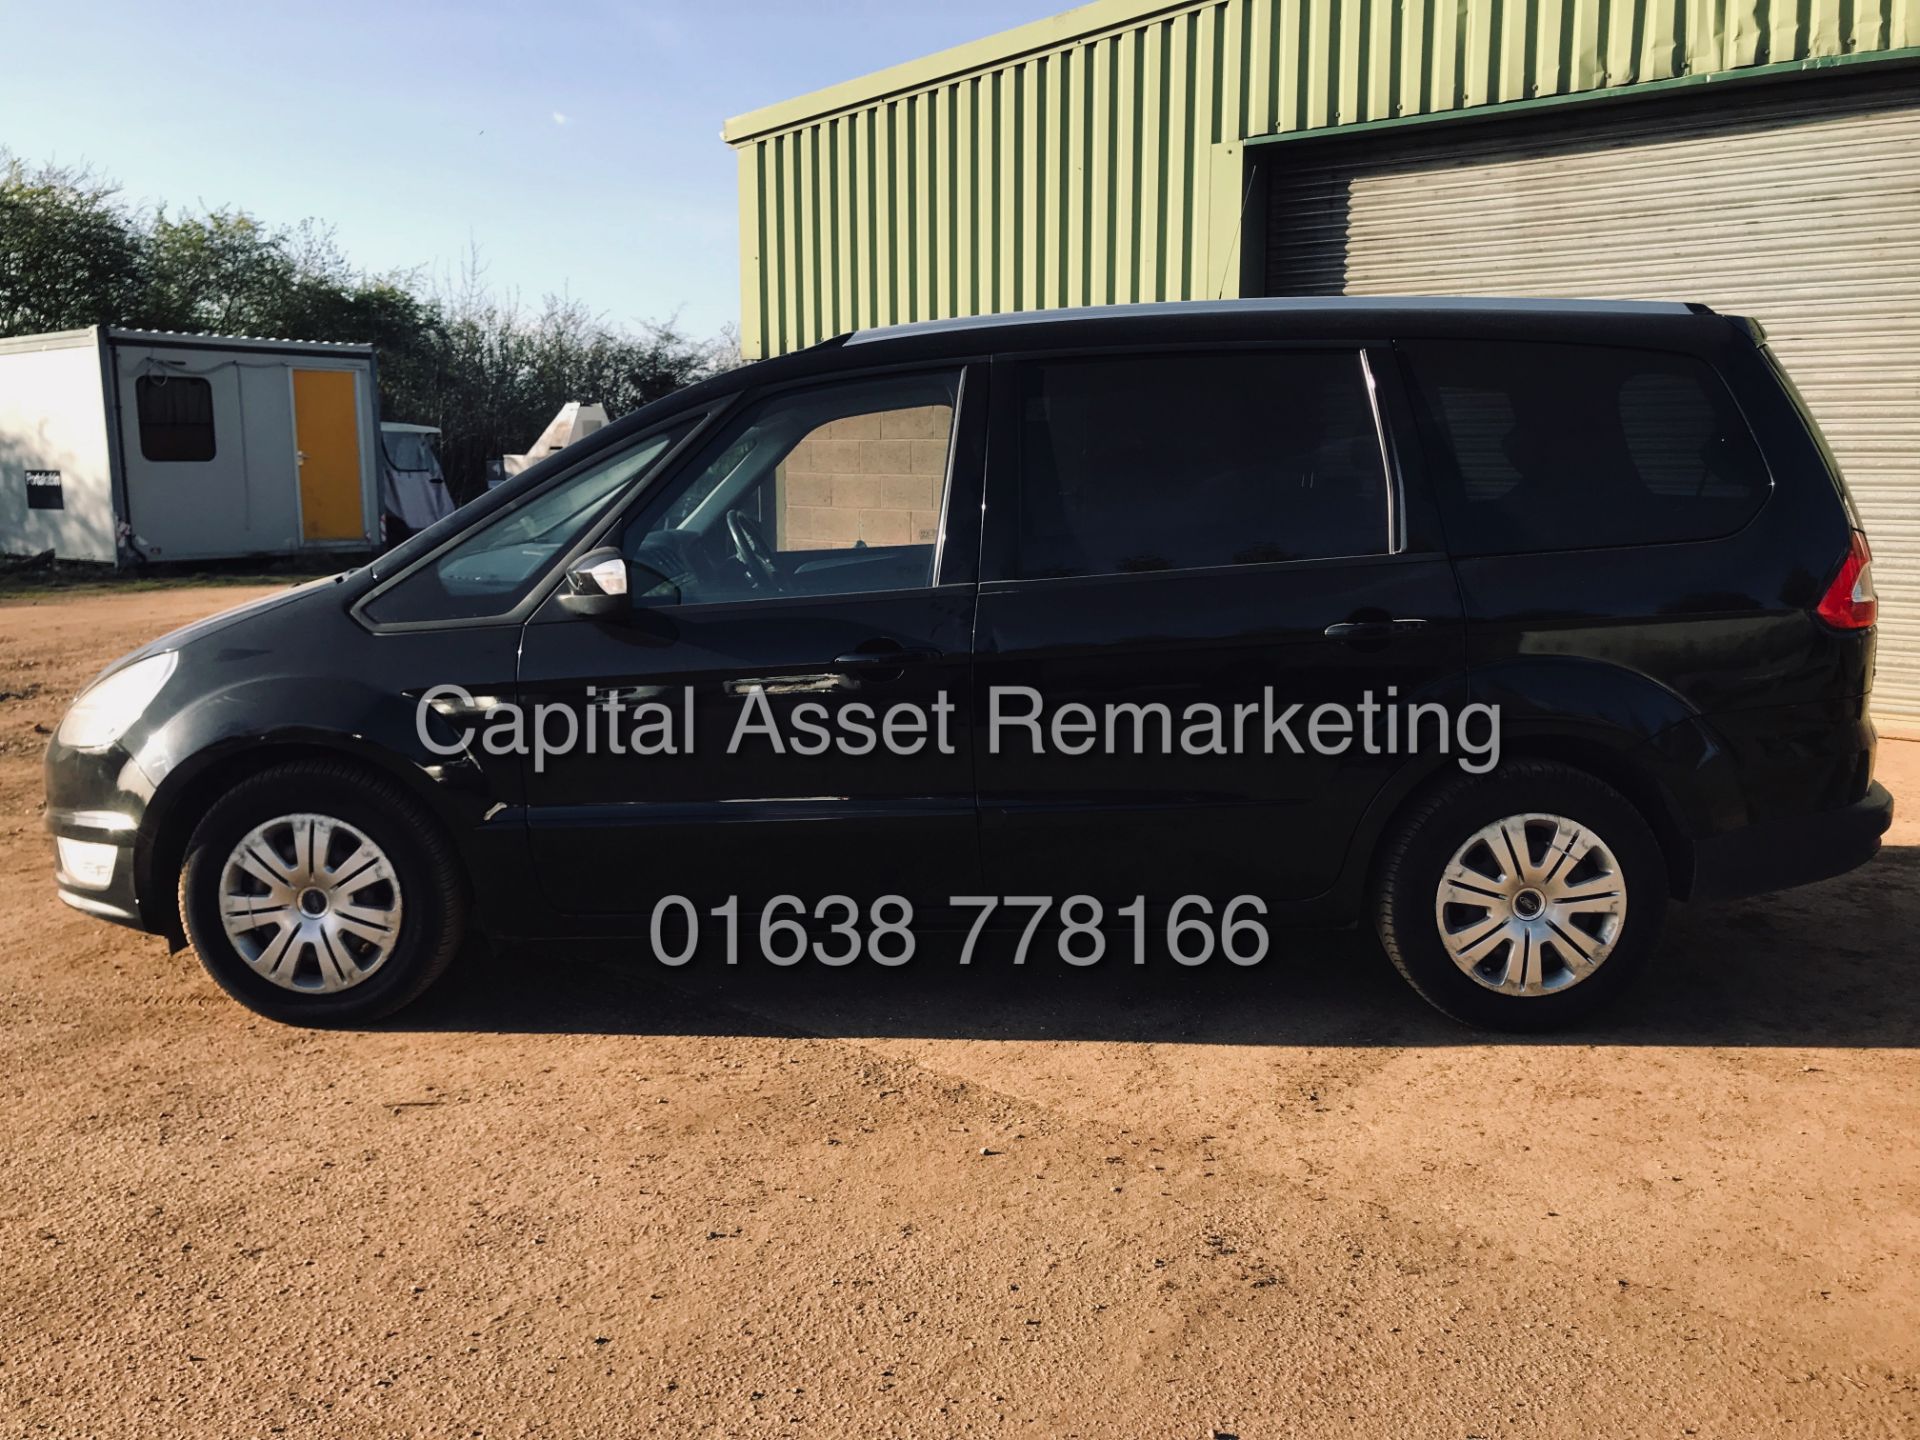 On Sale FORD GALAXY 2.0TDCI "ZETEC - POWERSHIFT" 7 SEATER (15 REG) AIR CON - 1 OWNER - 140BHP ENGINE - Image 2 of 17